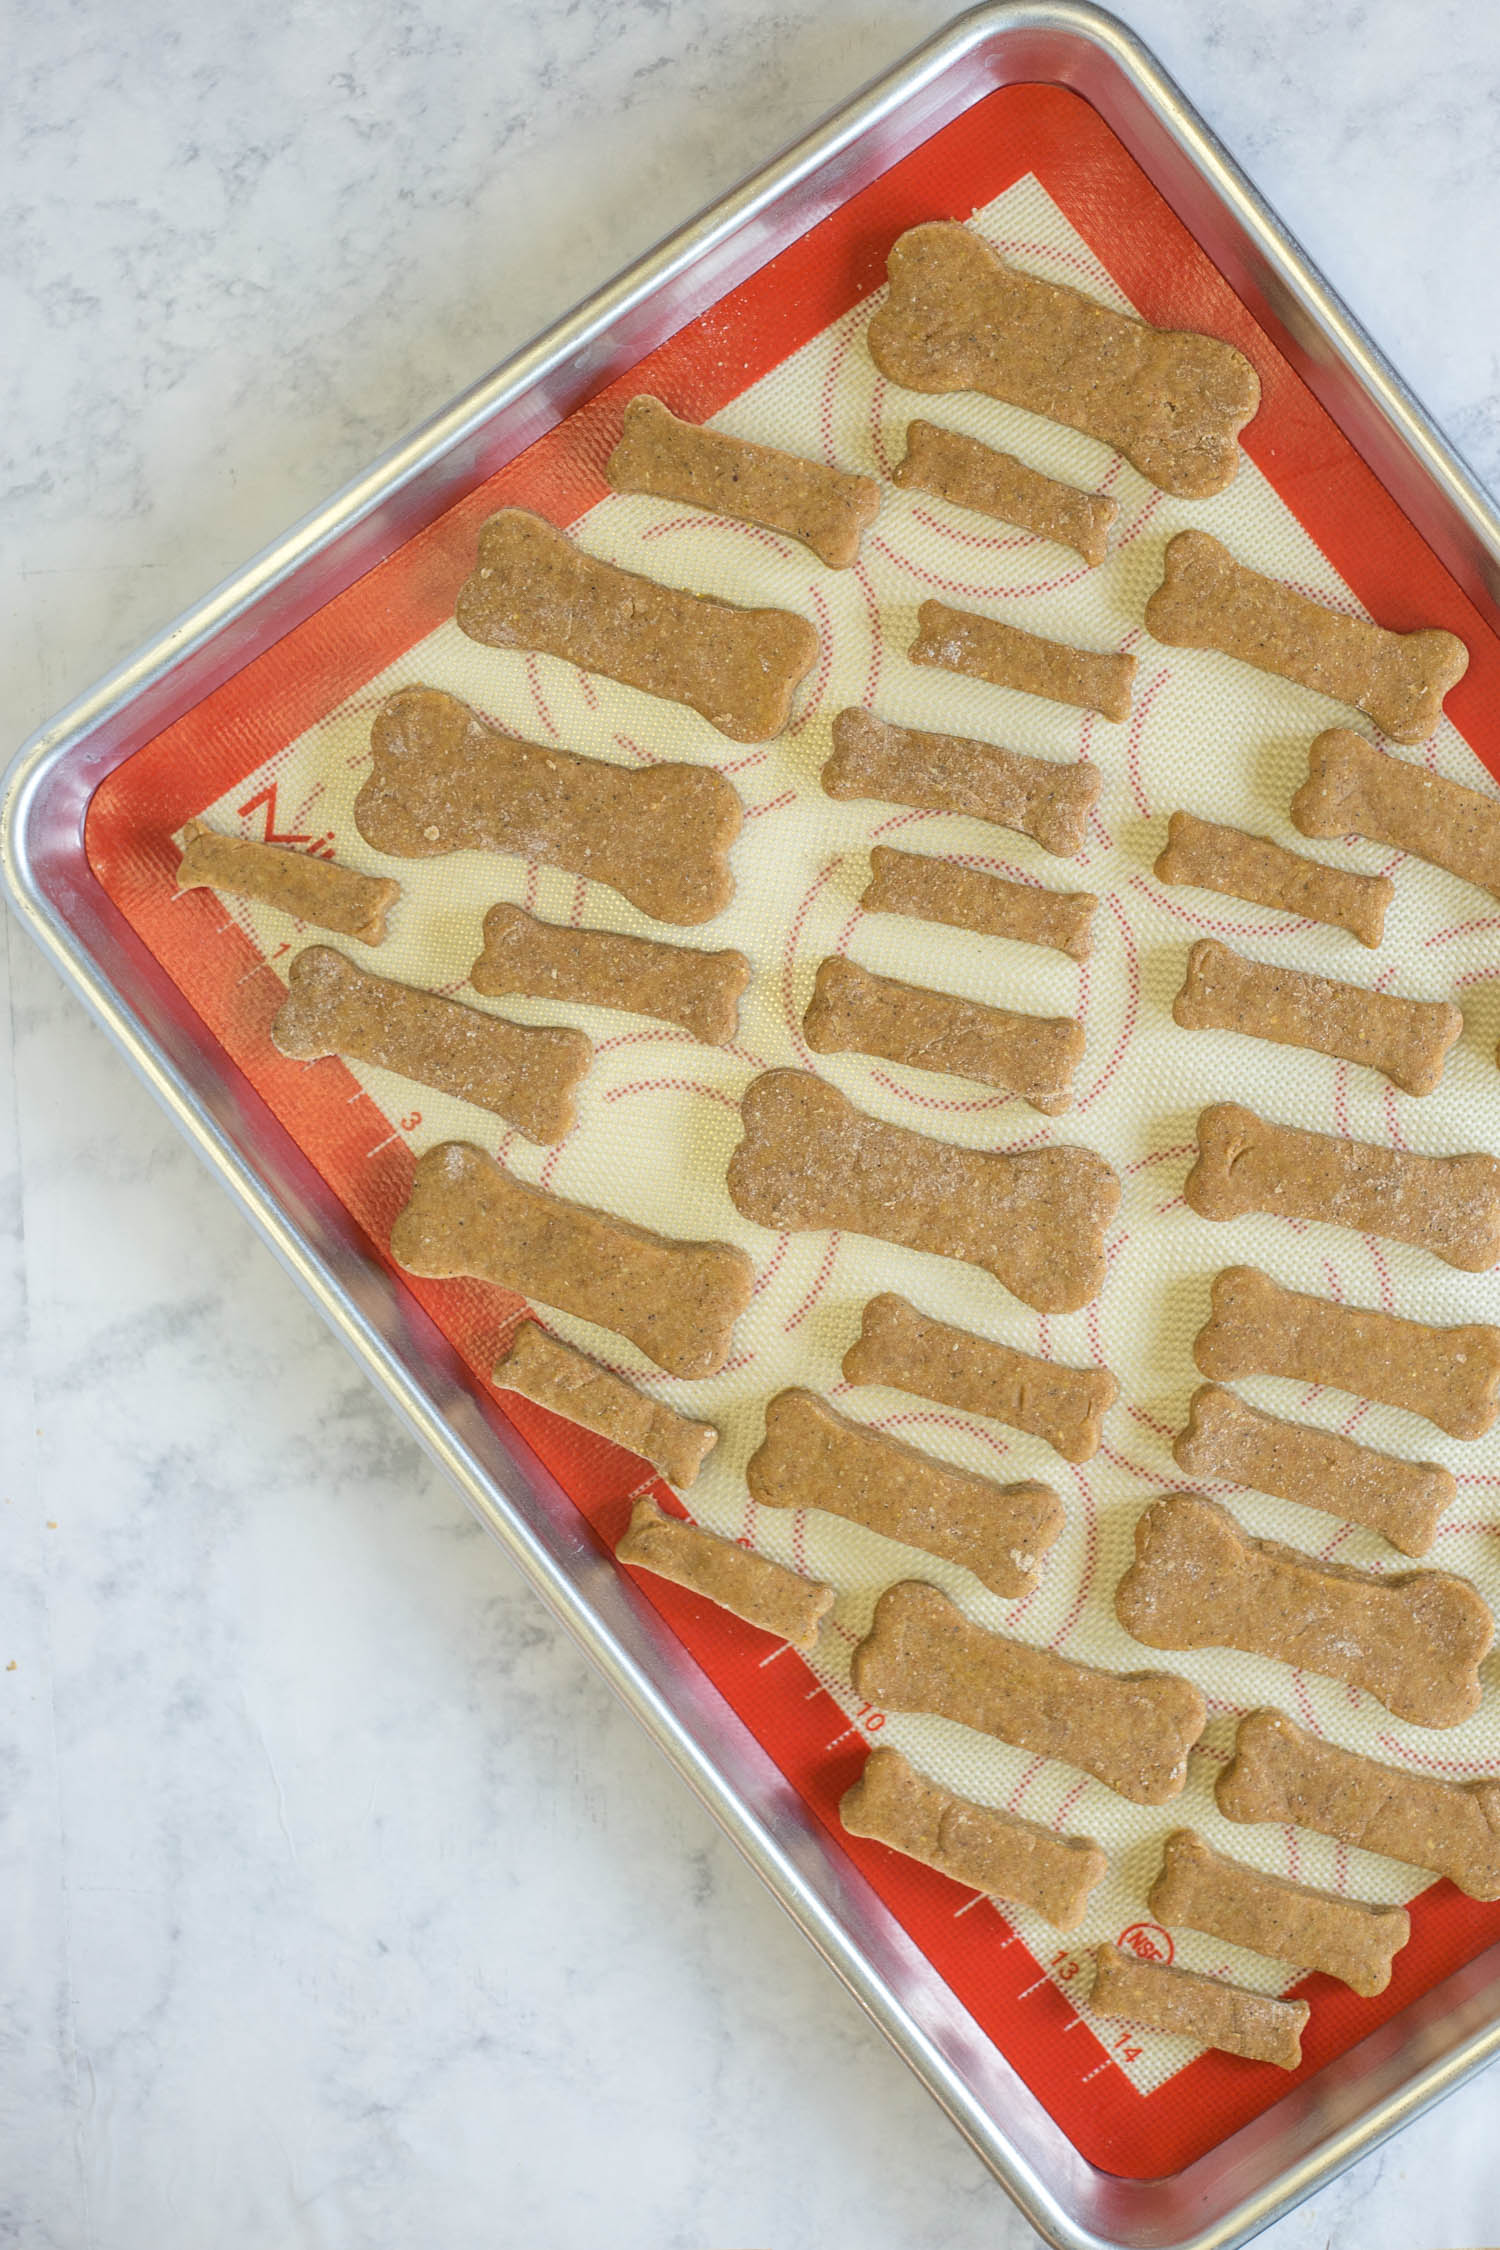 Baking sheet with dog biscuits